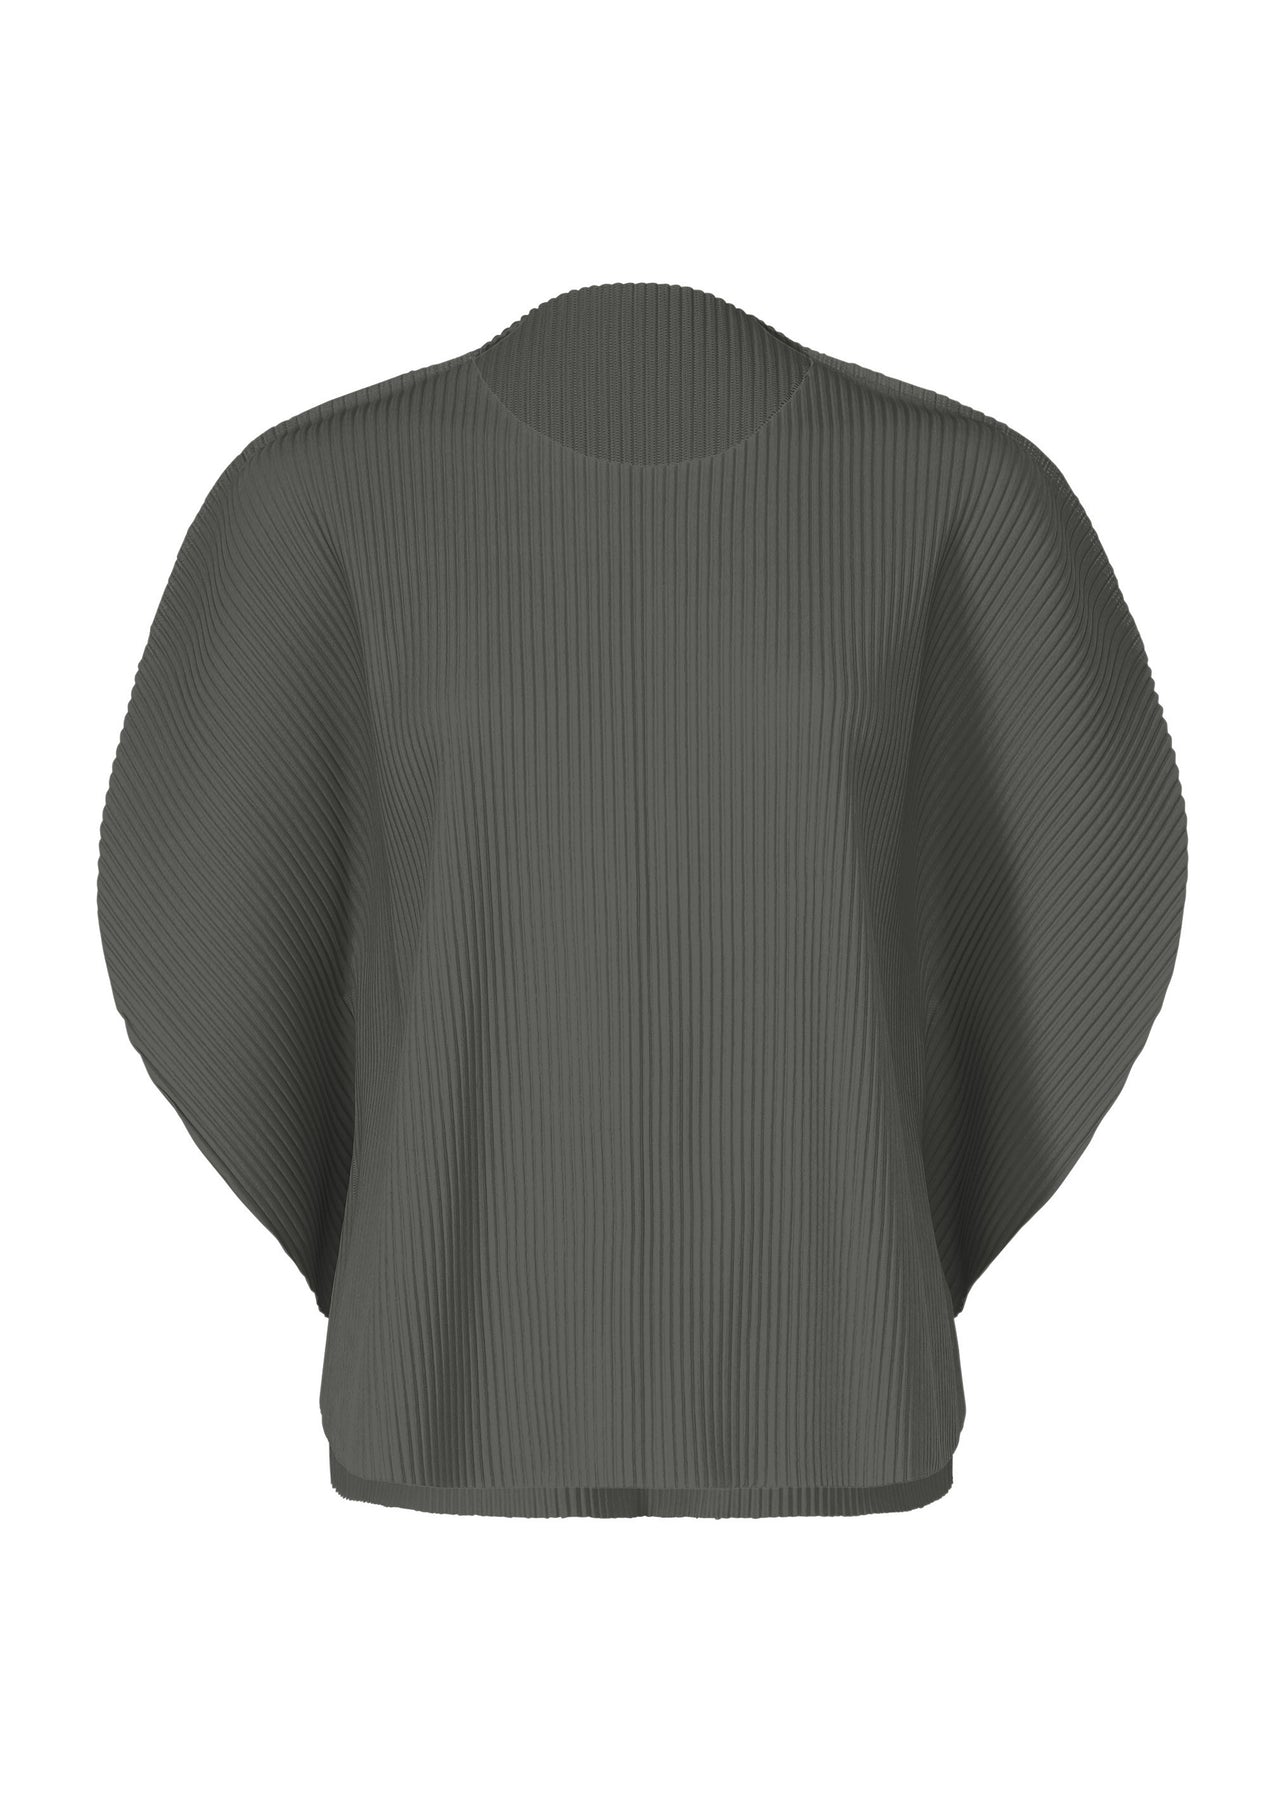 BALL PLEATS TOP | The official ISSEY MIYAKE ONLINE STORE | ISSEY